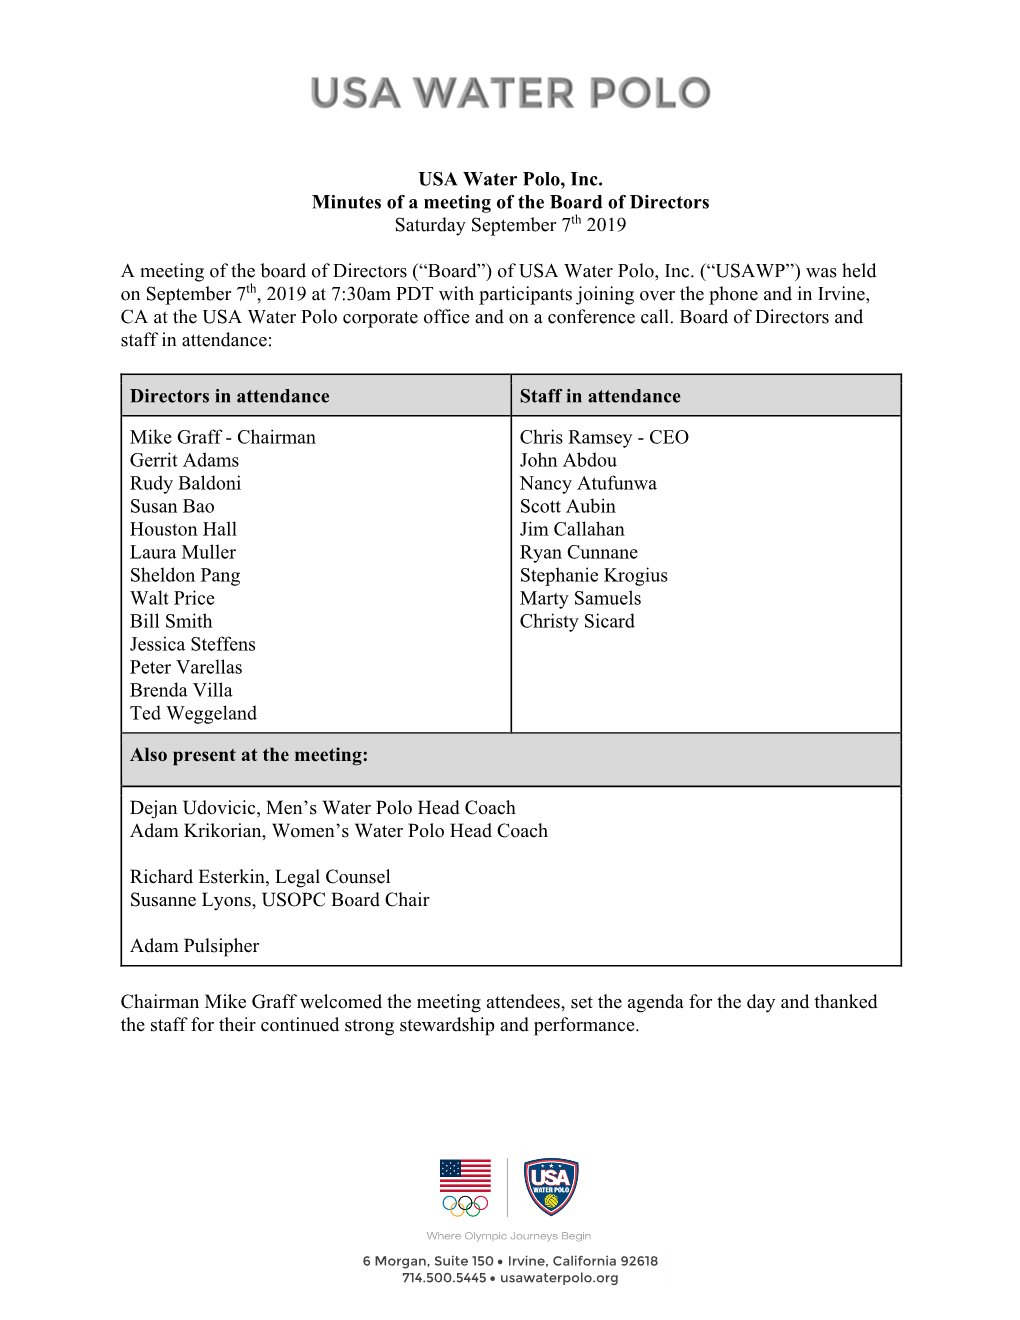 USA Water Polo, Inc. Minutes of a Meeting of the Board of Directors Saturday September 7Th 2019